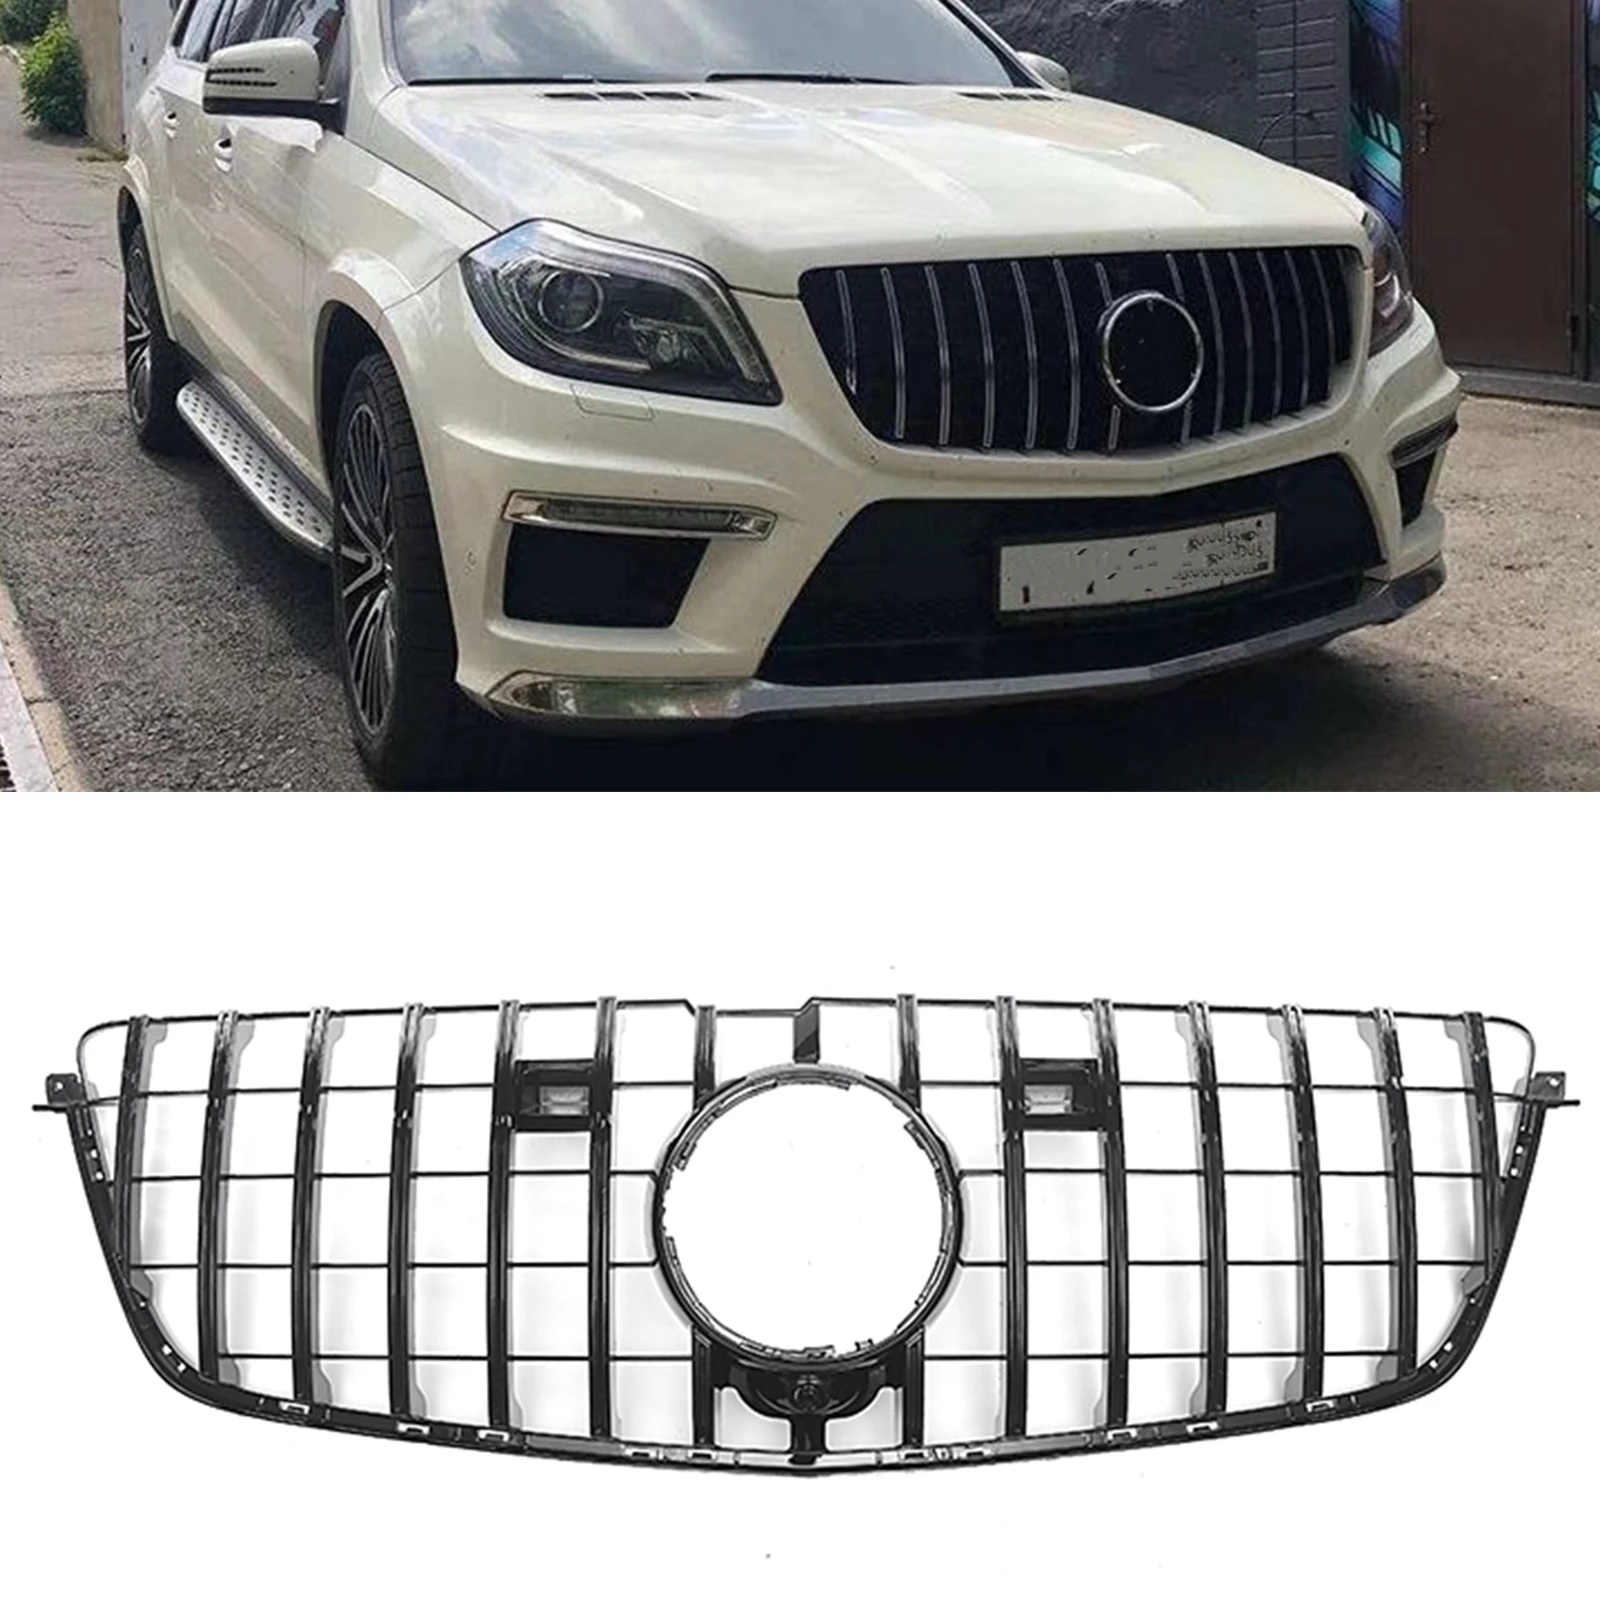 

Car Grill Front Grille Upper Bumper Hood Mesh With Camera Hole For Mercedes Benz X166 GL Class GL500 GL550 GL63 2013 2014 2015